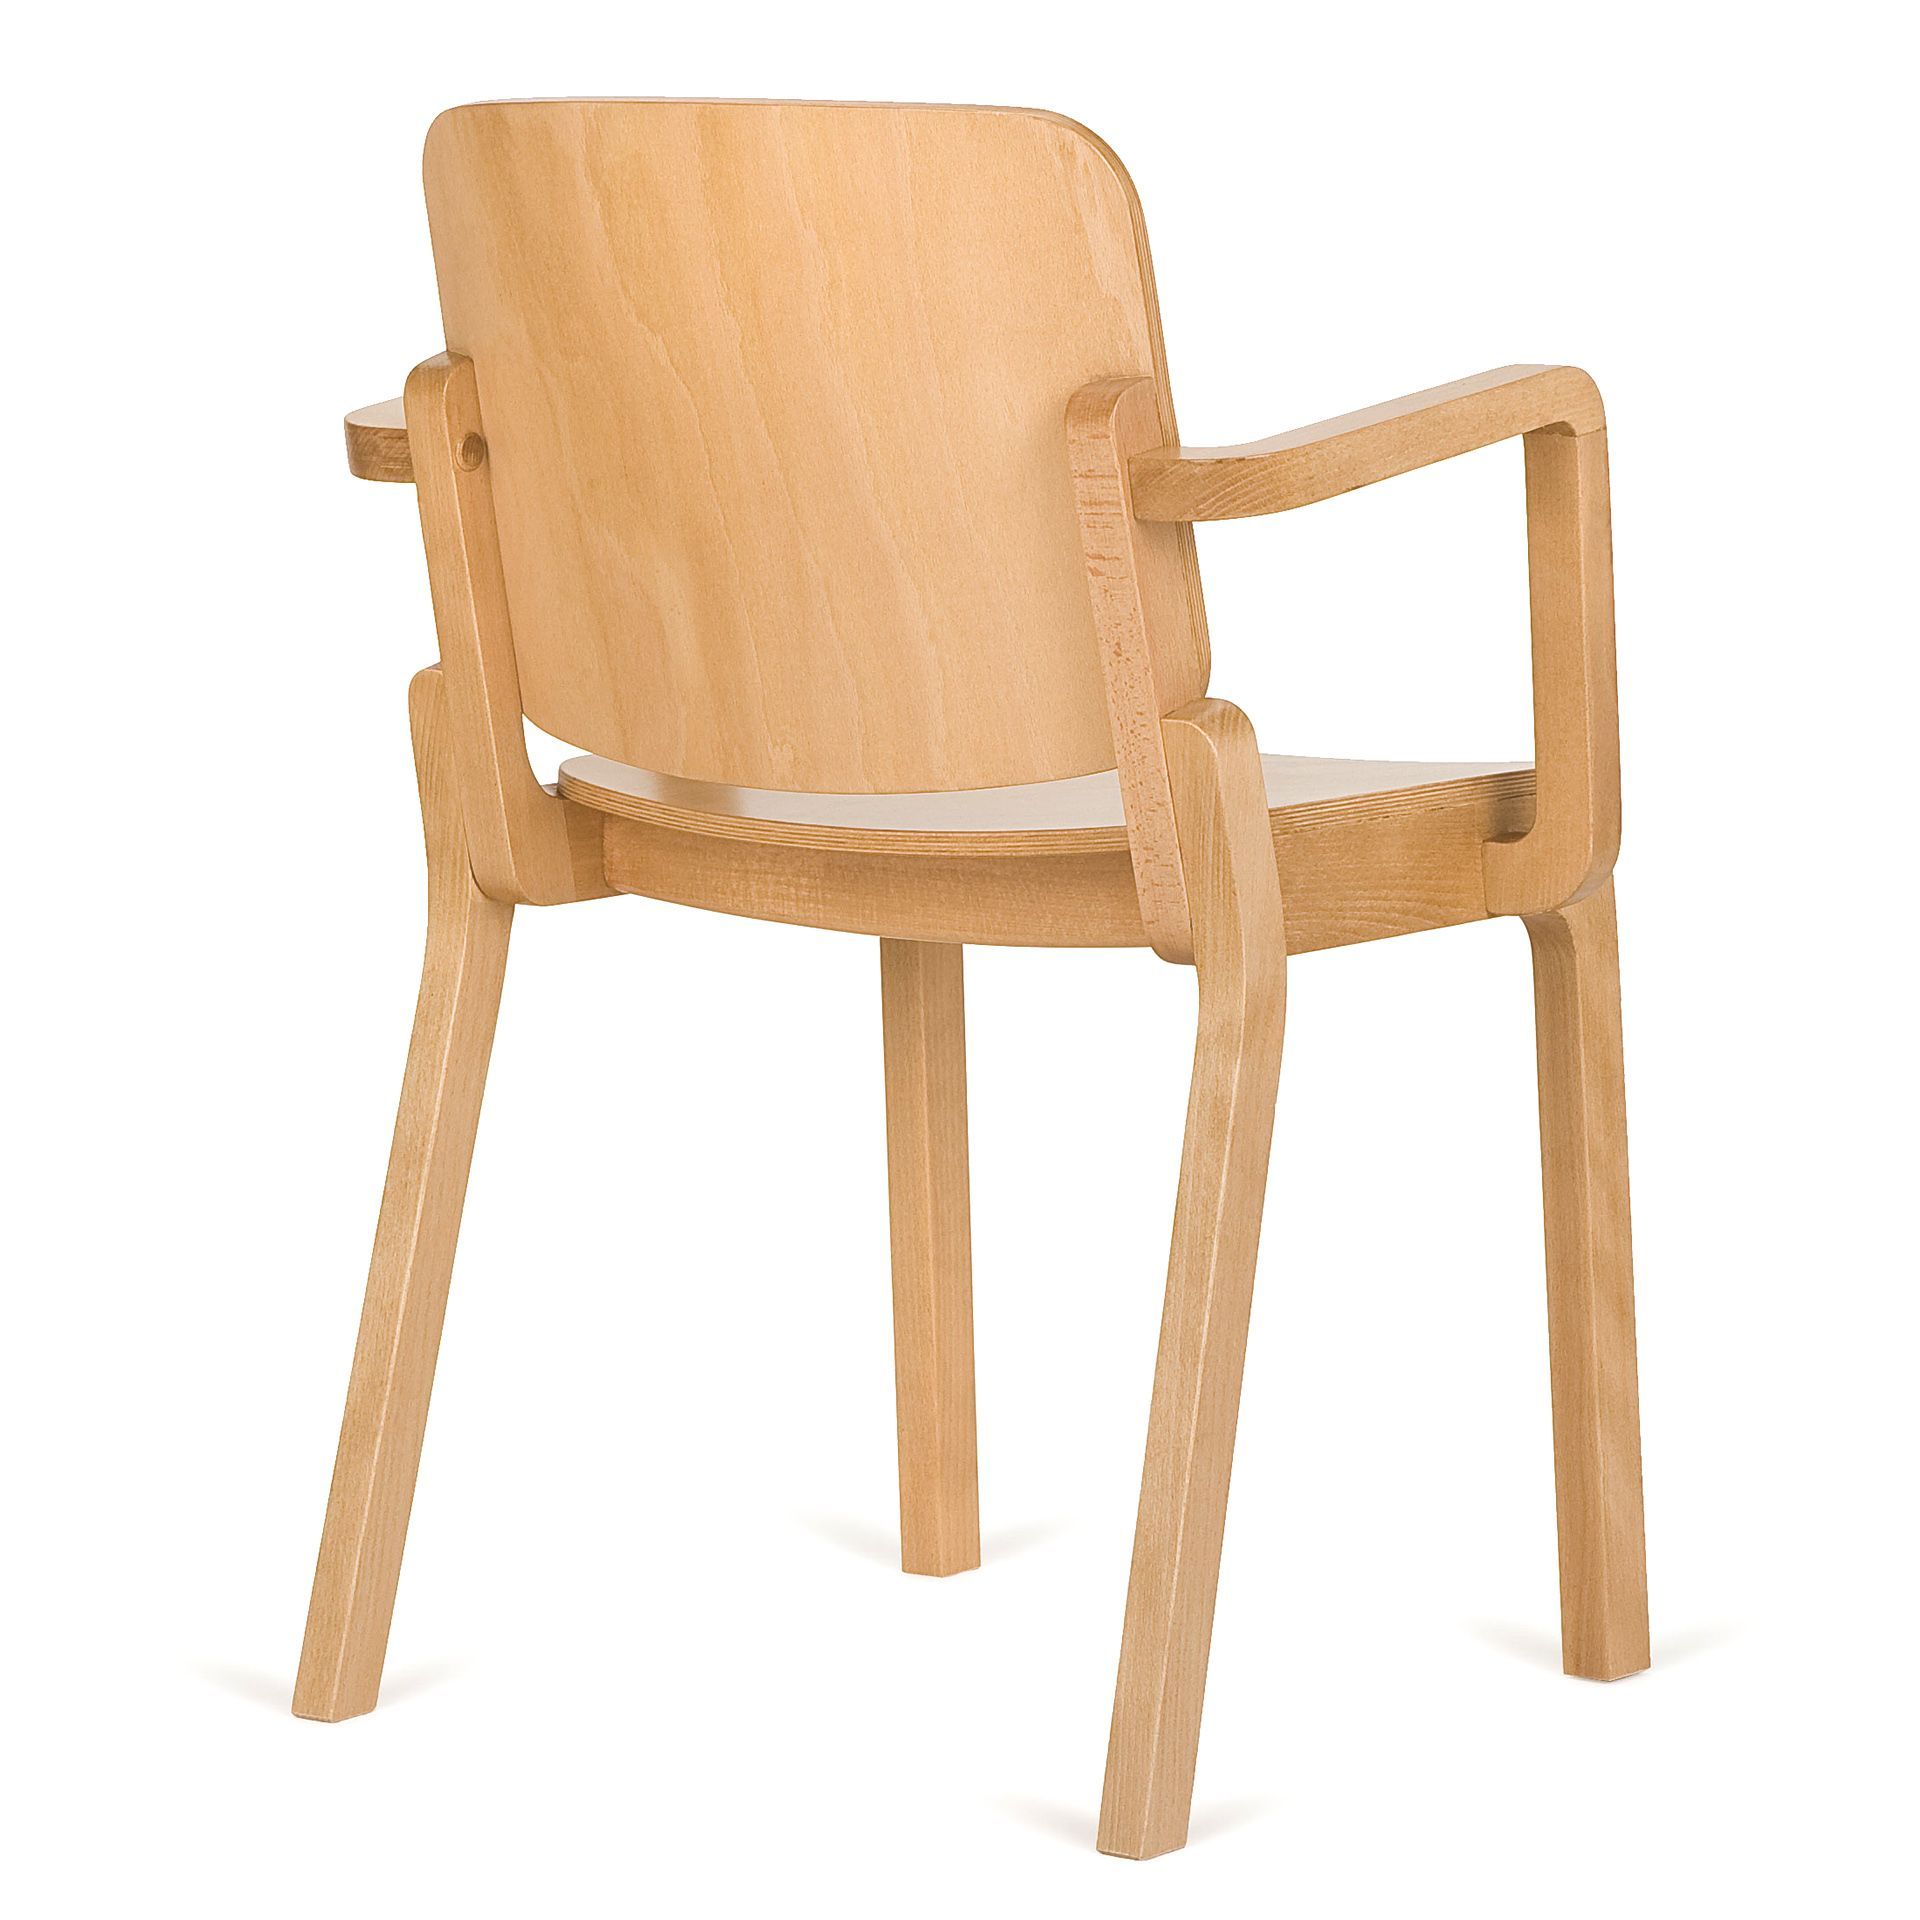 Chair B-3701 HIP by Paged